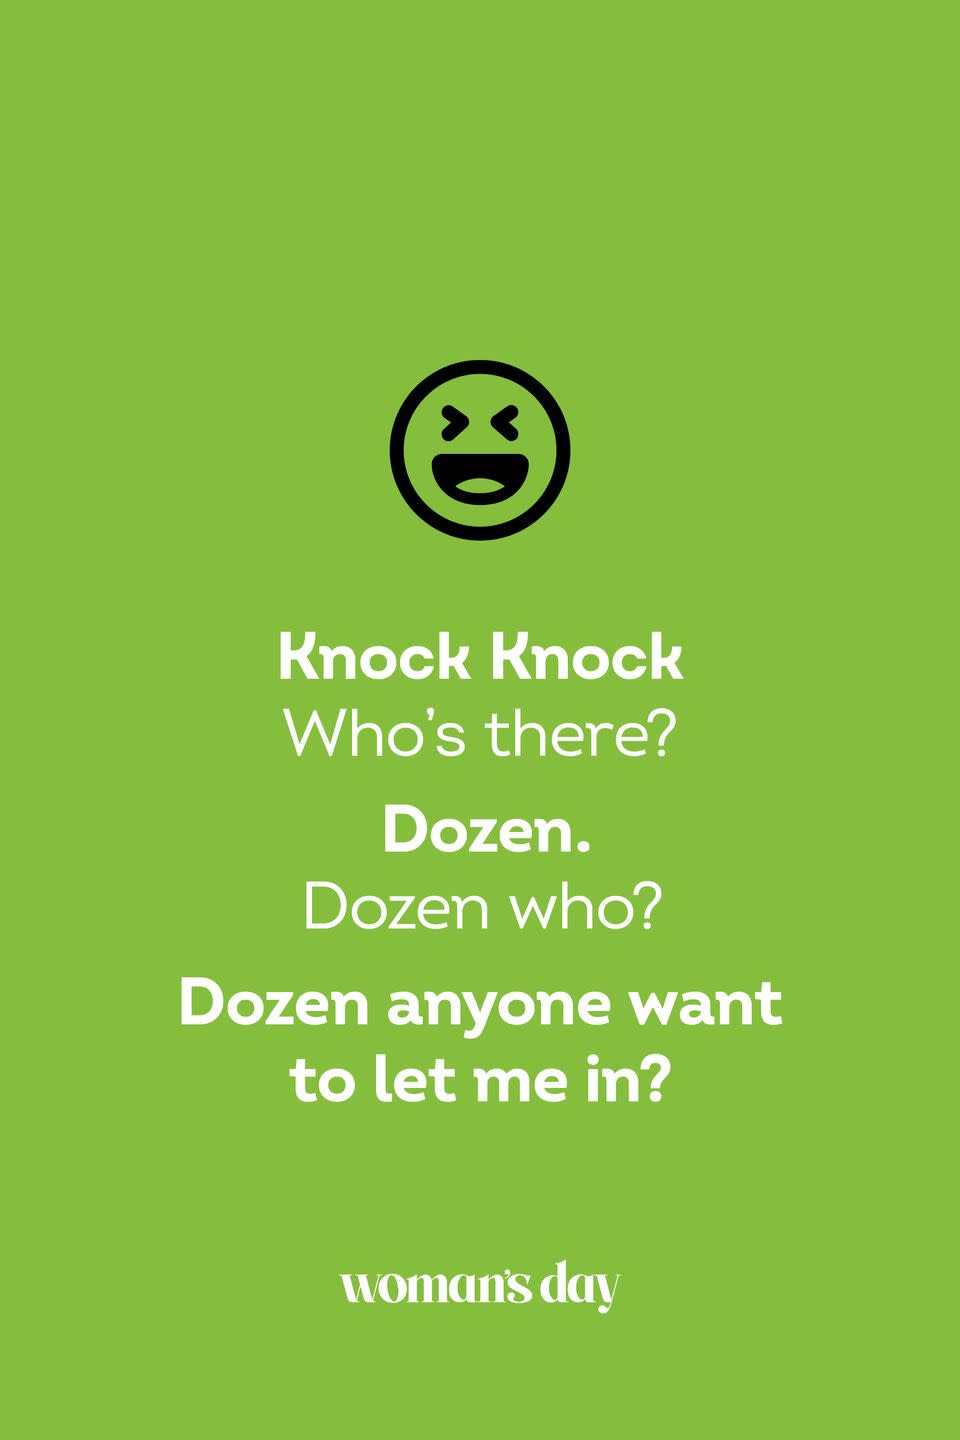 <p><strong>Knock Knock.</strong></p><p><em>Who’s there?</em></p><p><strong>Dozen.</strong></p><p><em>Dozen who?</em></p><p><strong>Dozen anyone want to let me in?</strong></p>